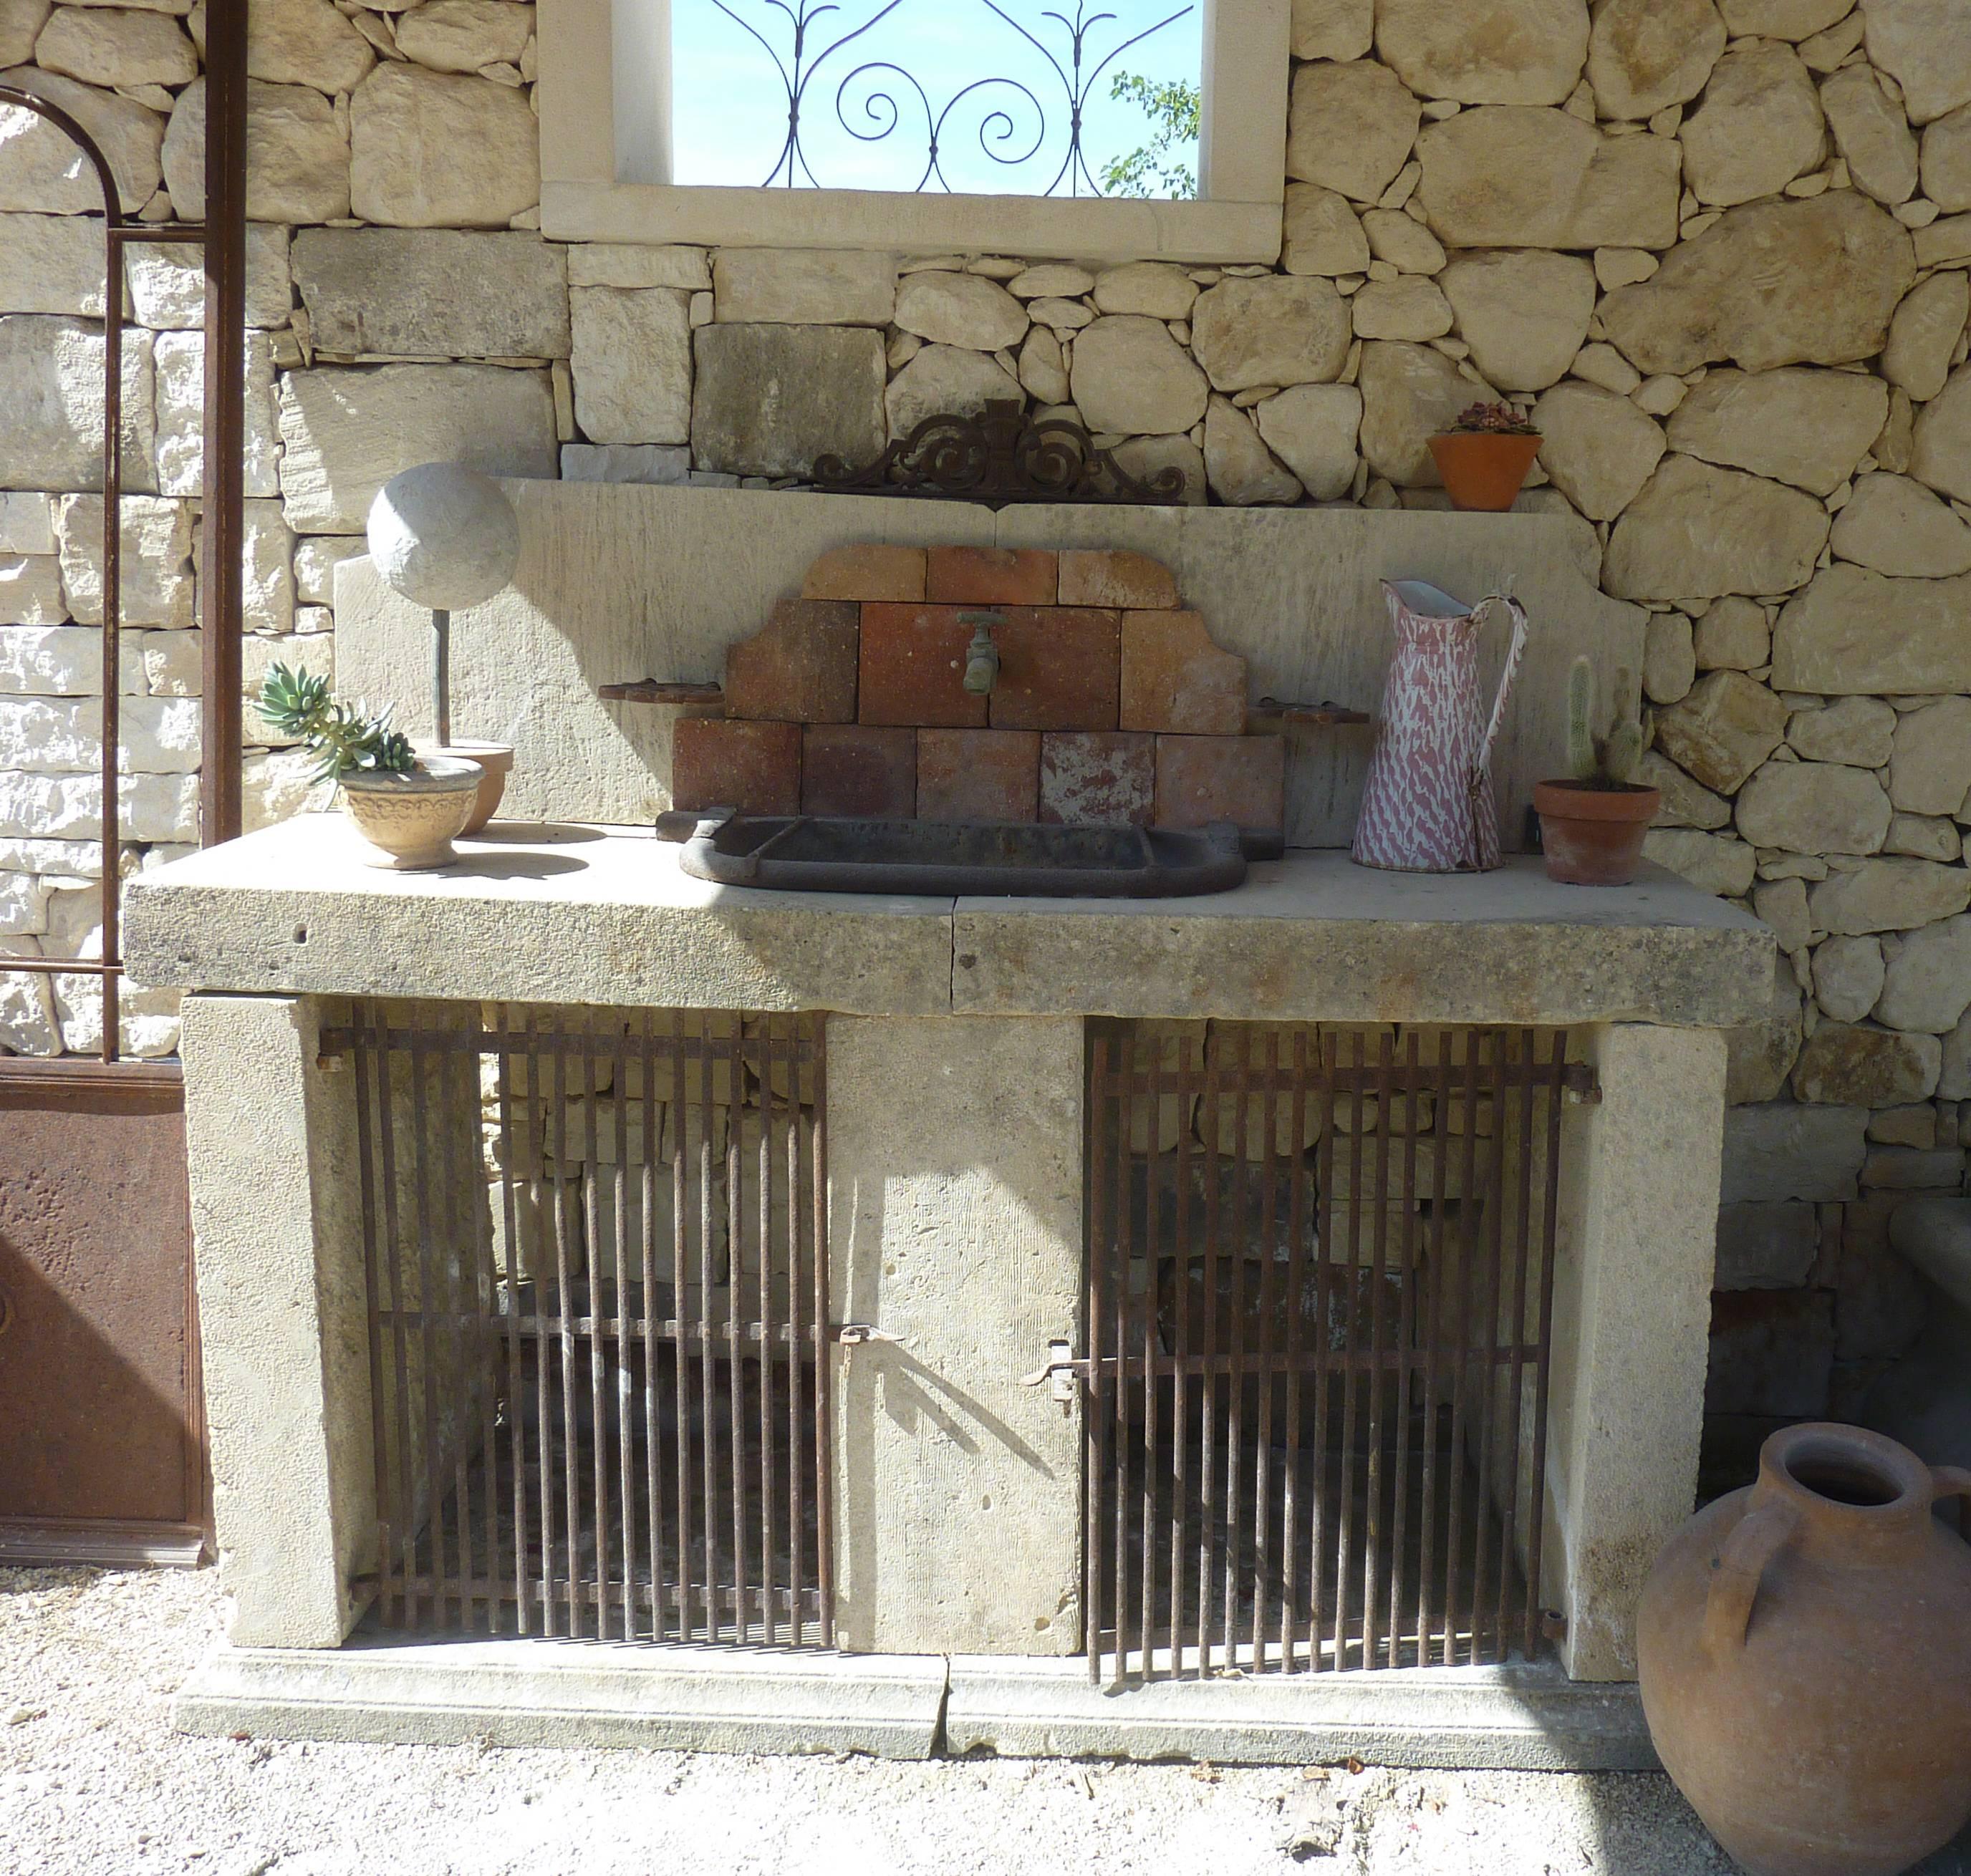 French Summer Kitchen in Antique Materials with Wrought-Iron Sink and Terracotta Tiles